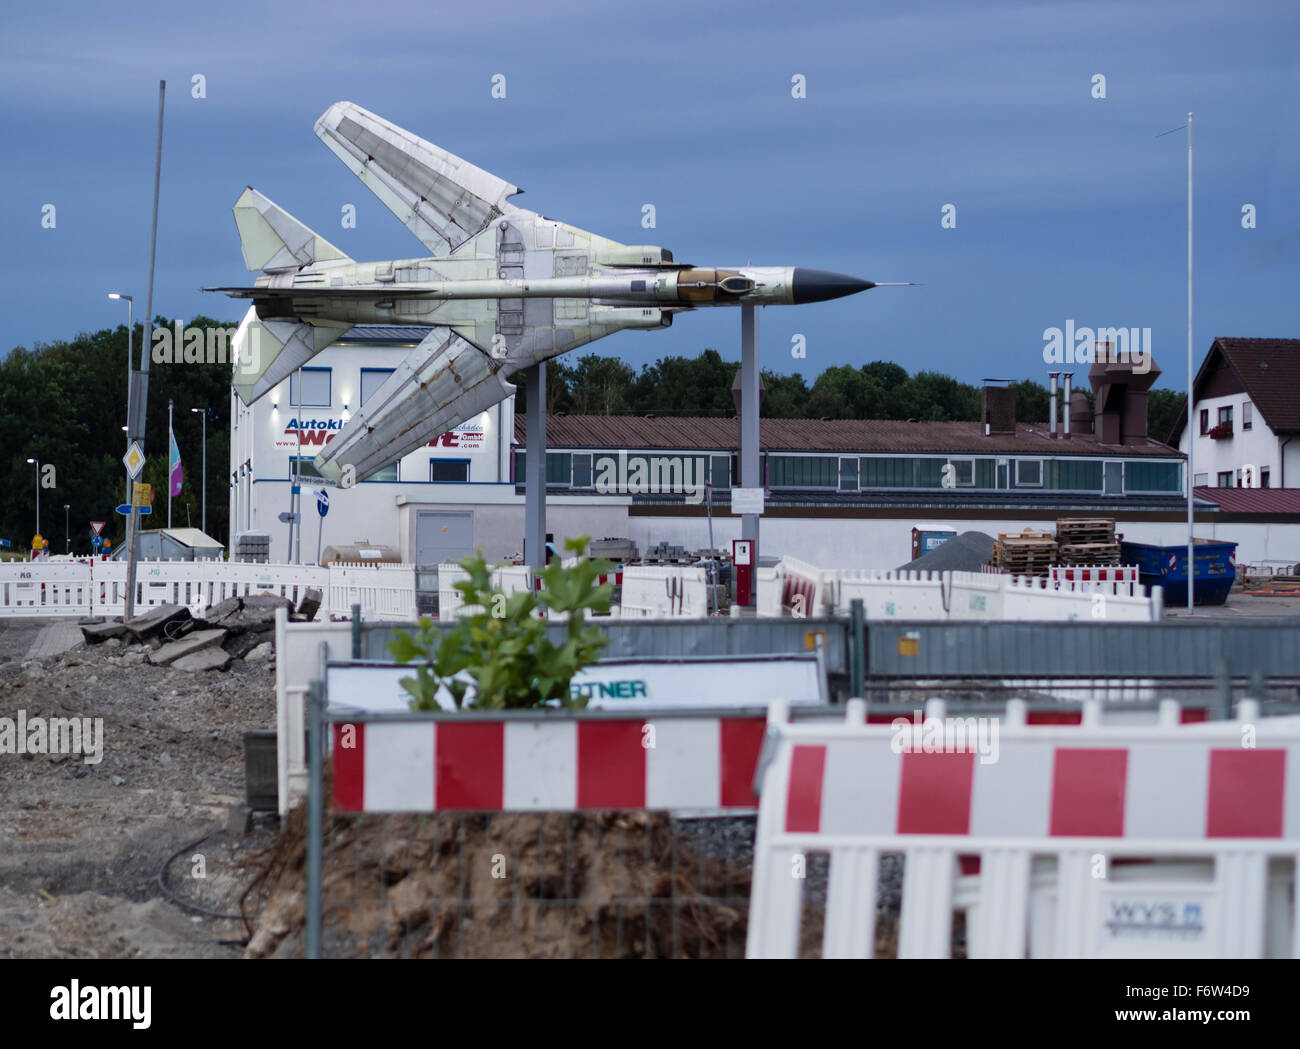 A discarded Russian MIG-23 fighter jet is set up for display in the midst of a temporary construction site in front of a museum. Stock Photo